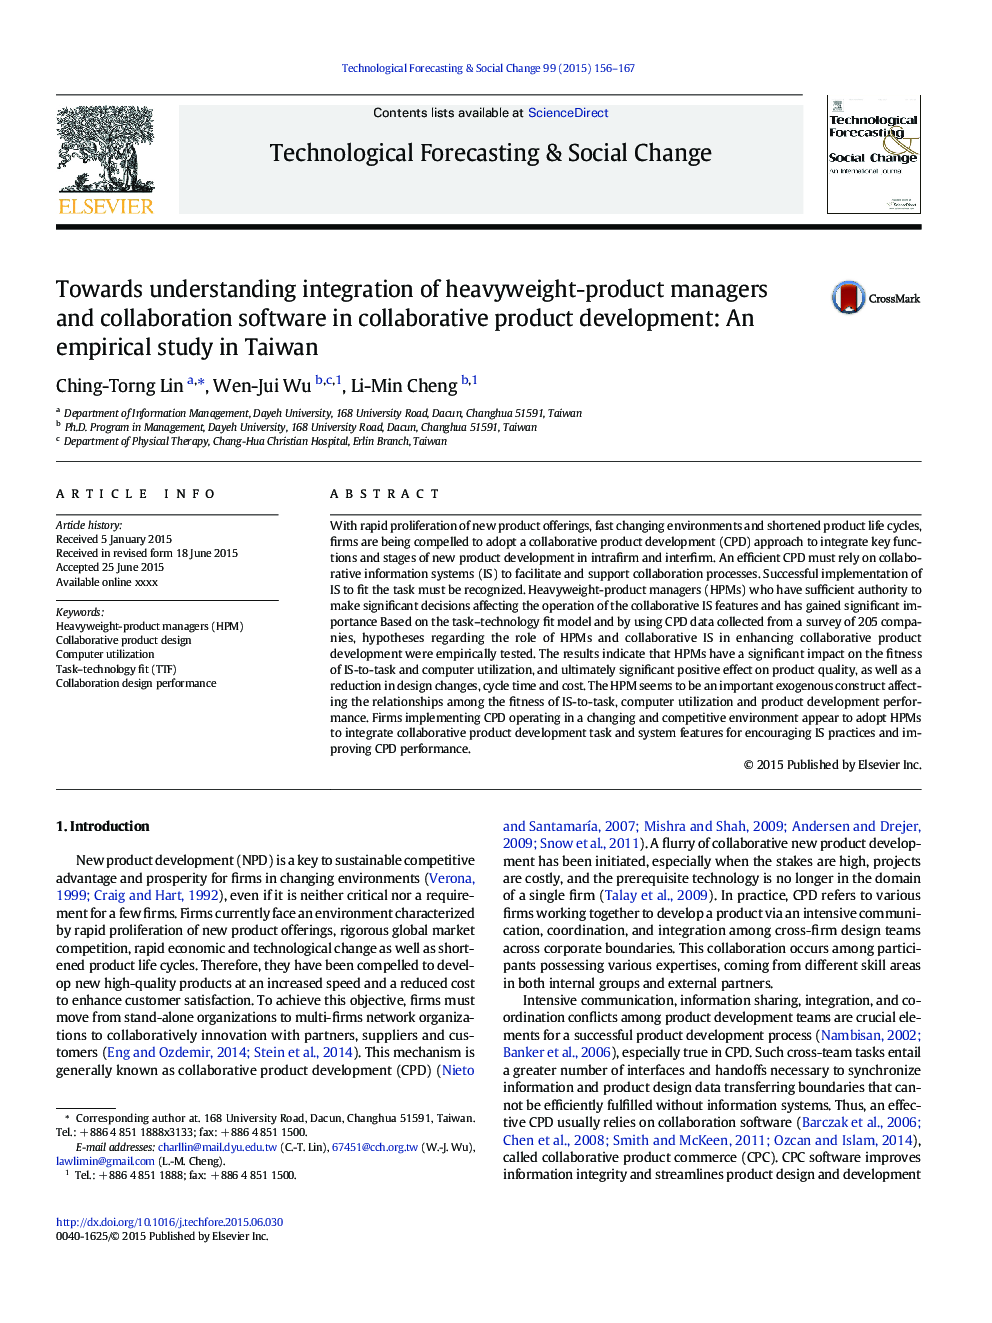 Towards understanding integration of heavyweight-product managers and collaboration software in collaborative product development: An empirical study in Taiwan